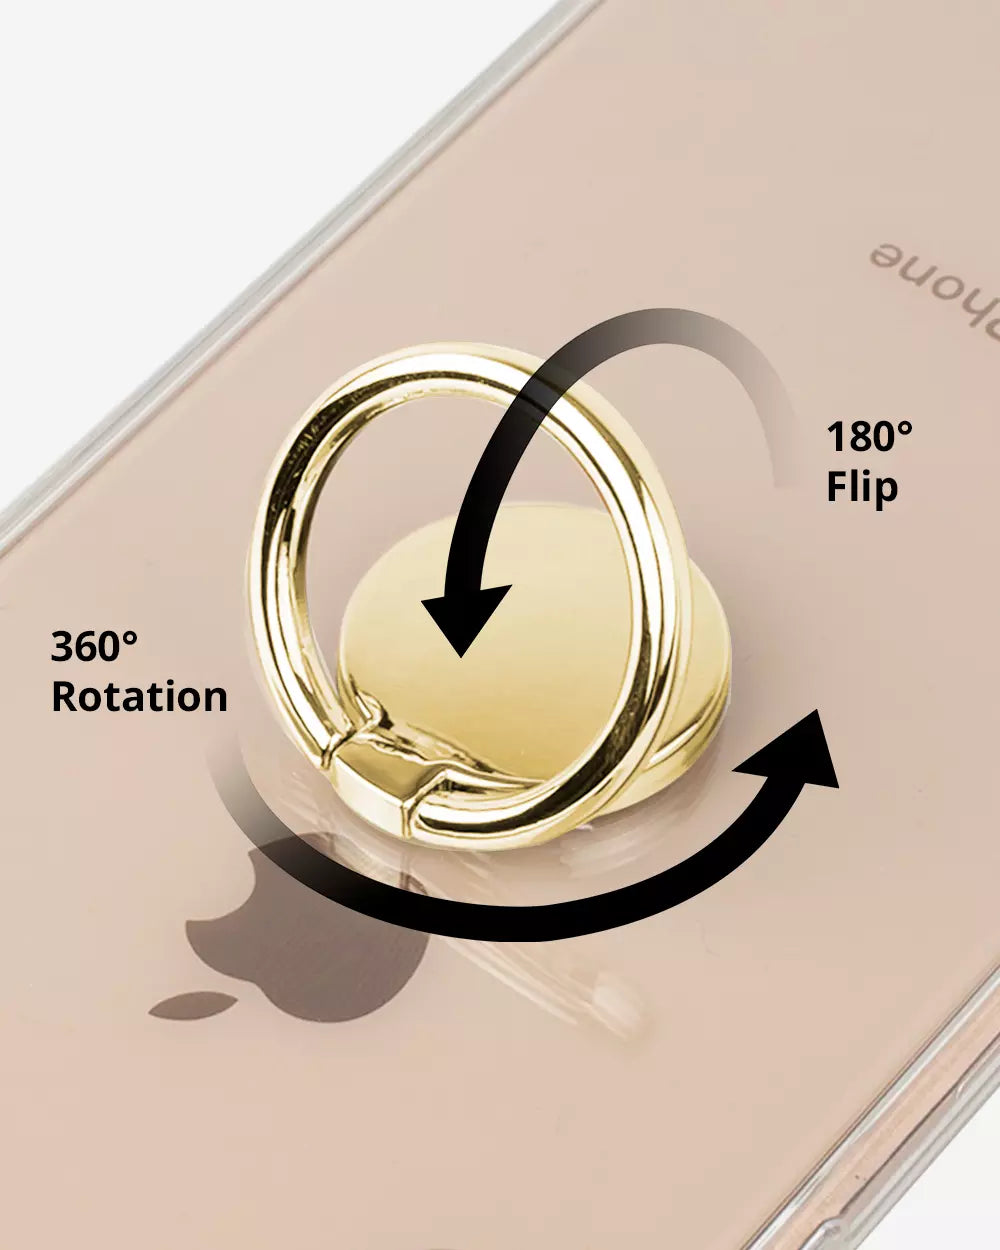 Gold phone ring on iPhone with 360 rotation and 180 flip 